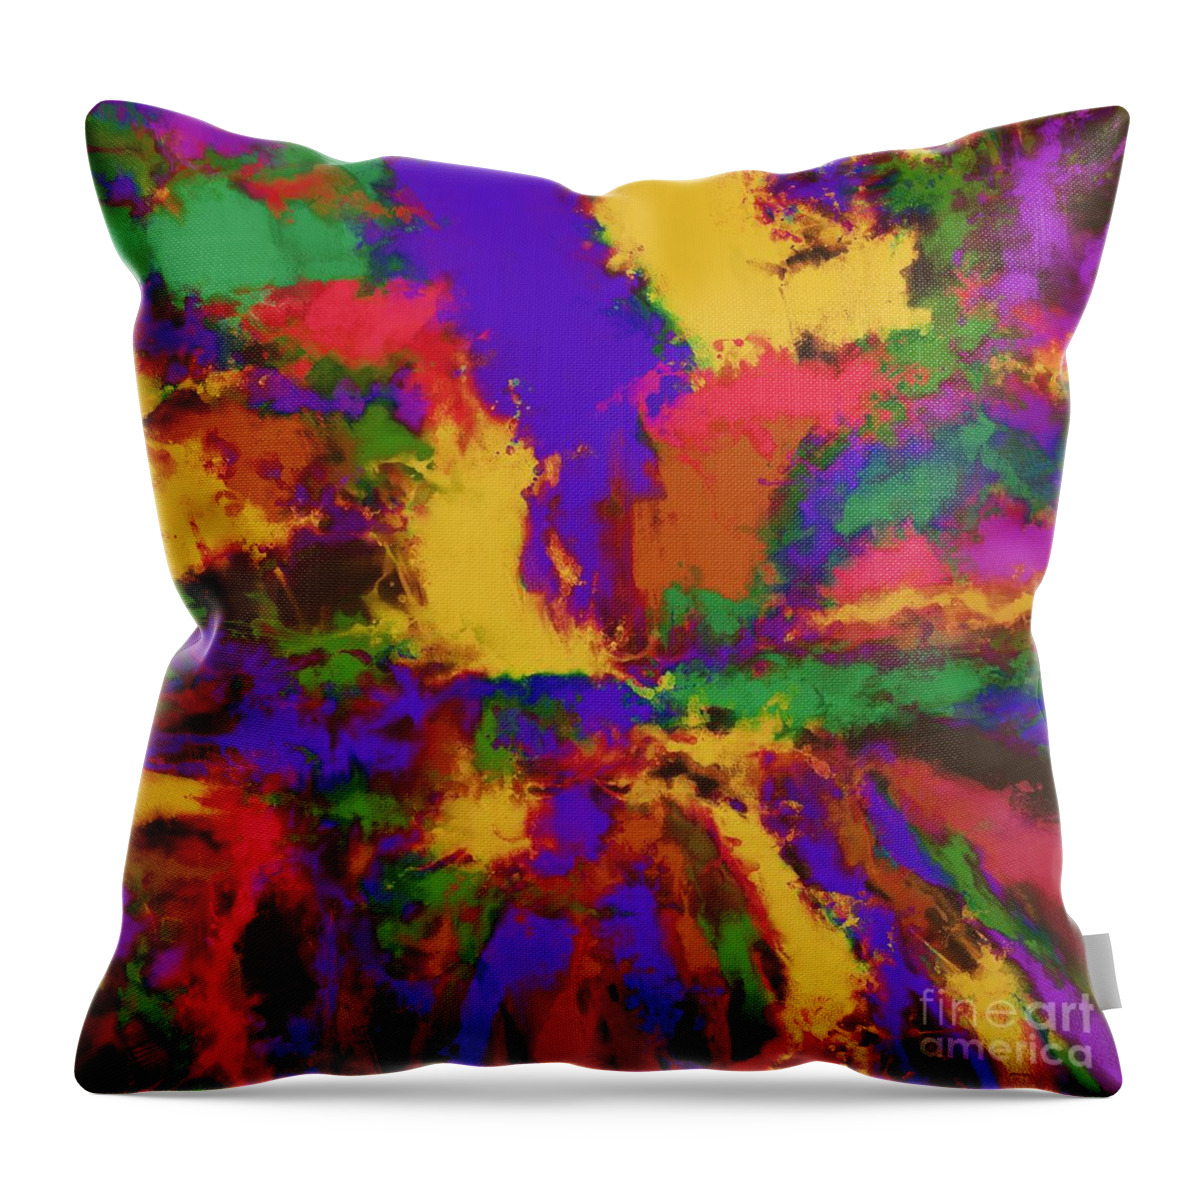 First Moment Throw Pillow featuring the digital art First moment by Keith Mills